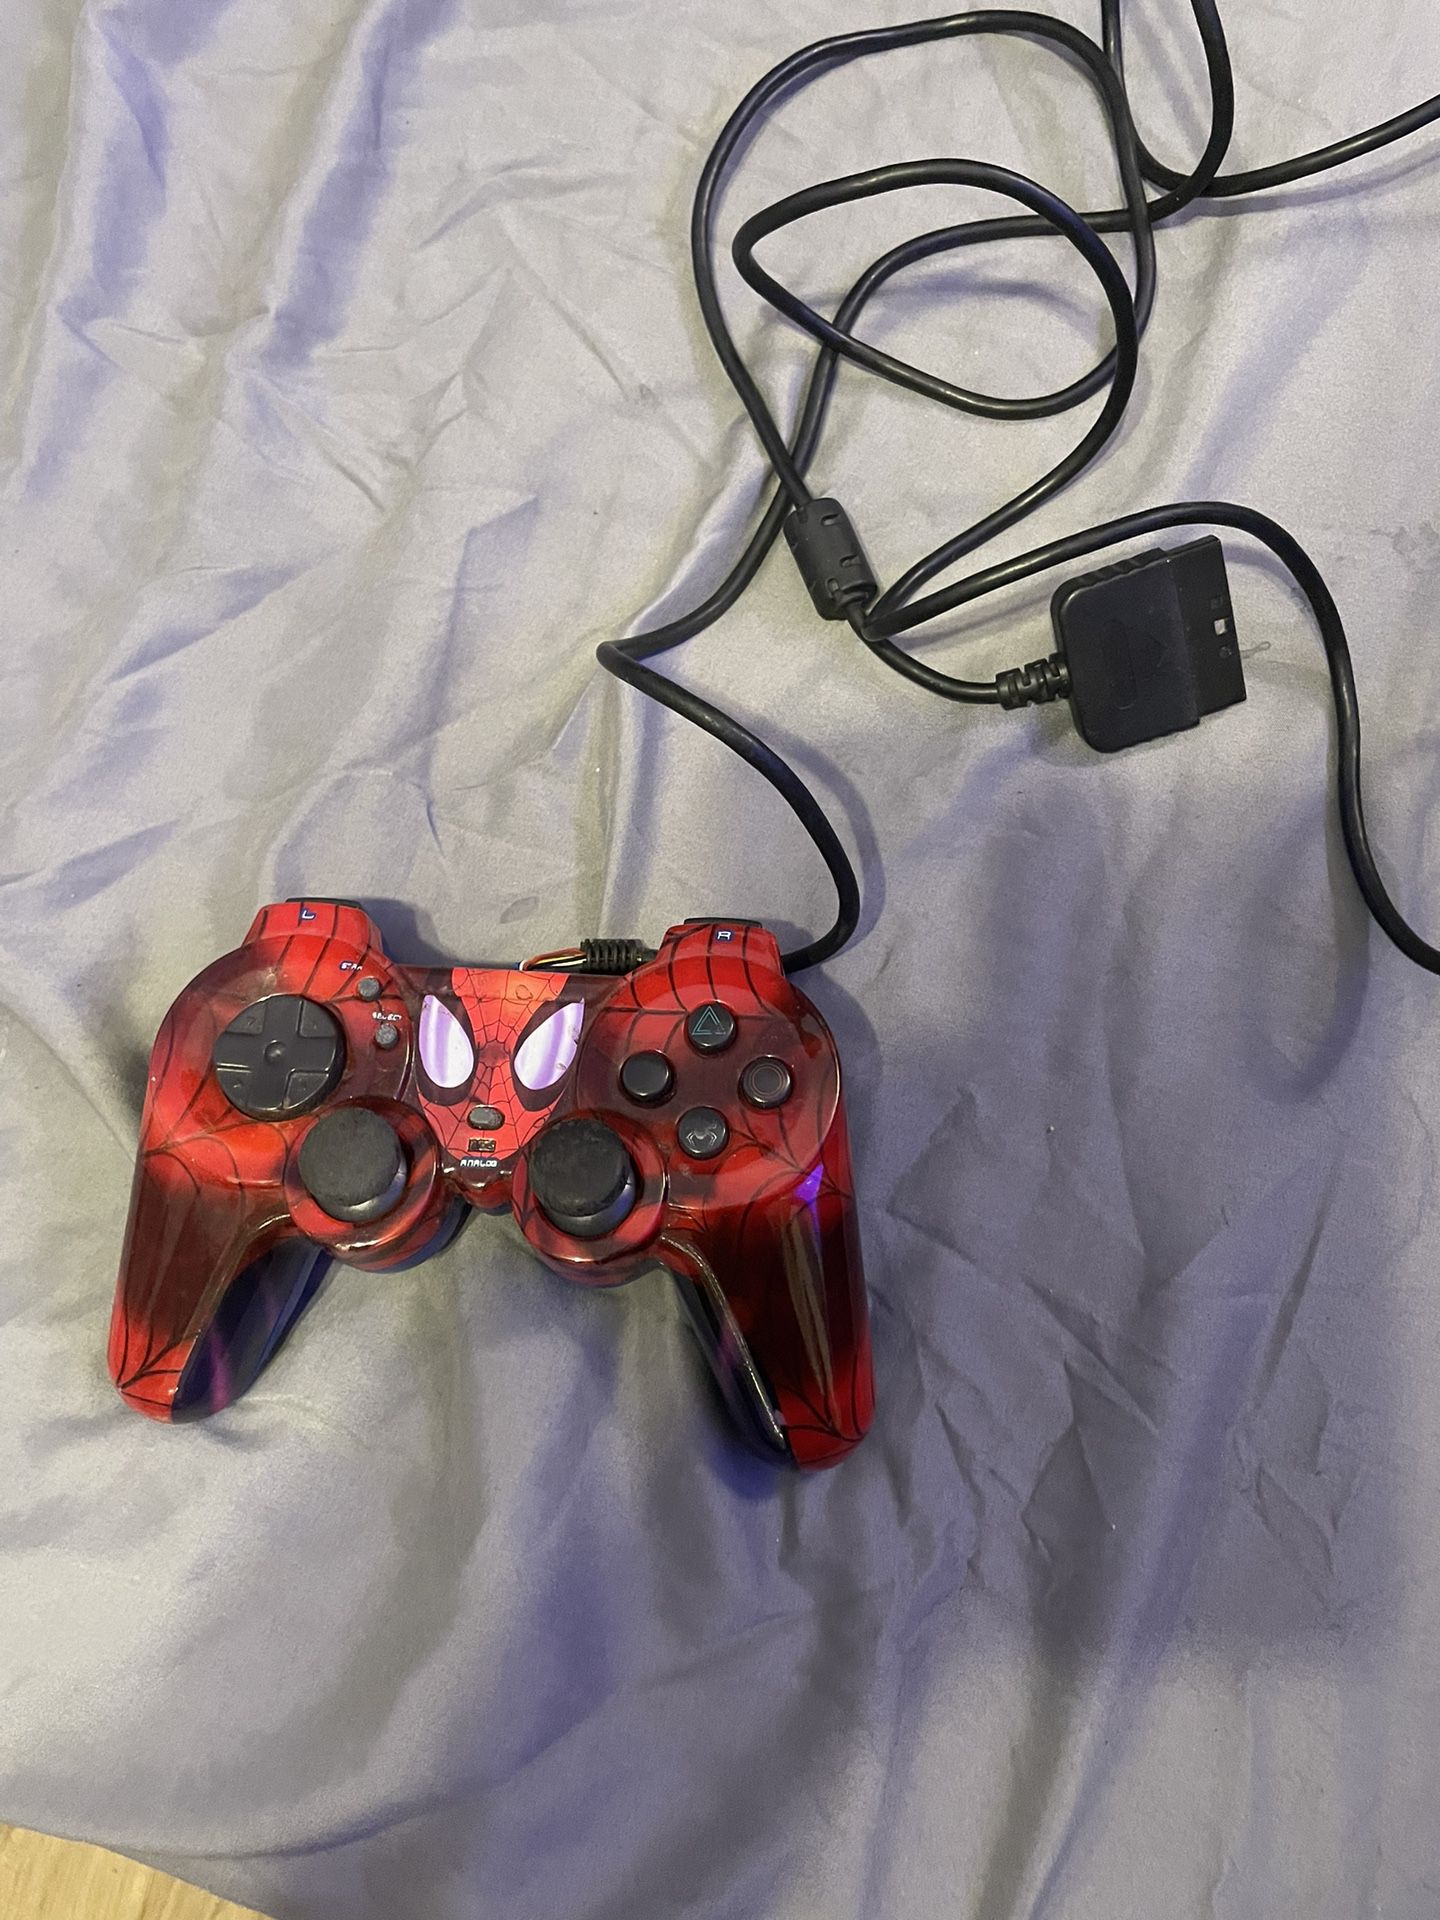 SpidermAn Ps2 Controller 